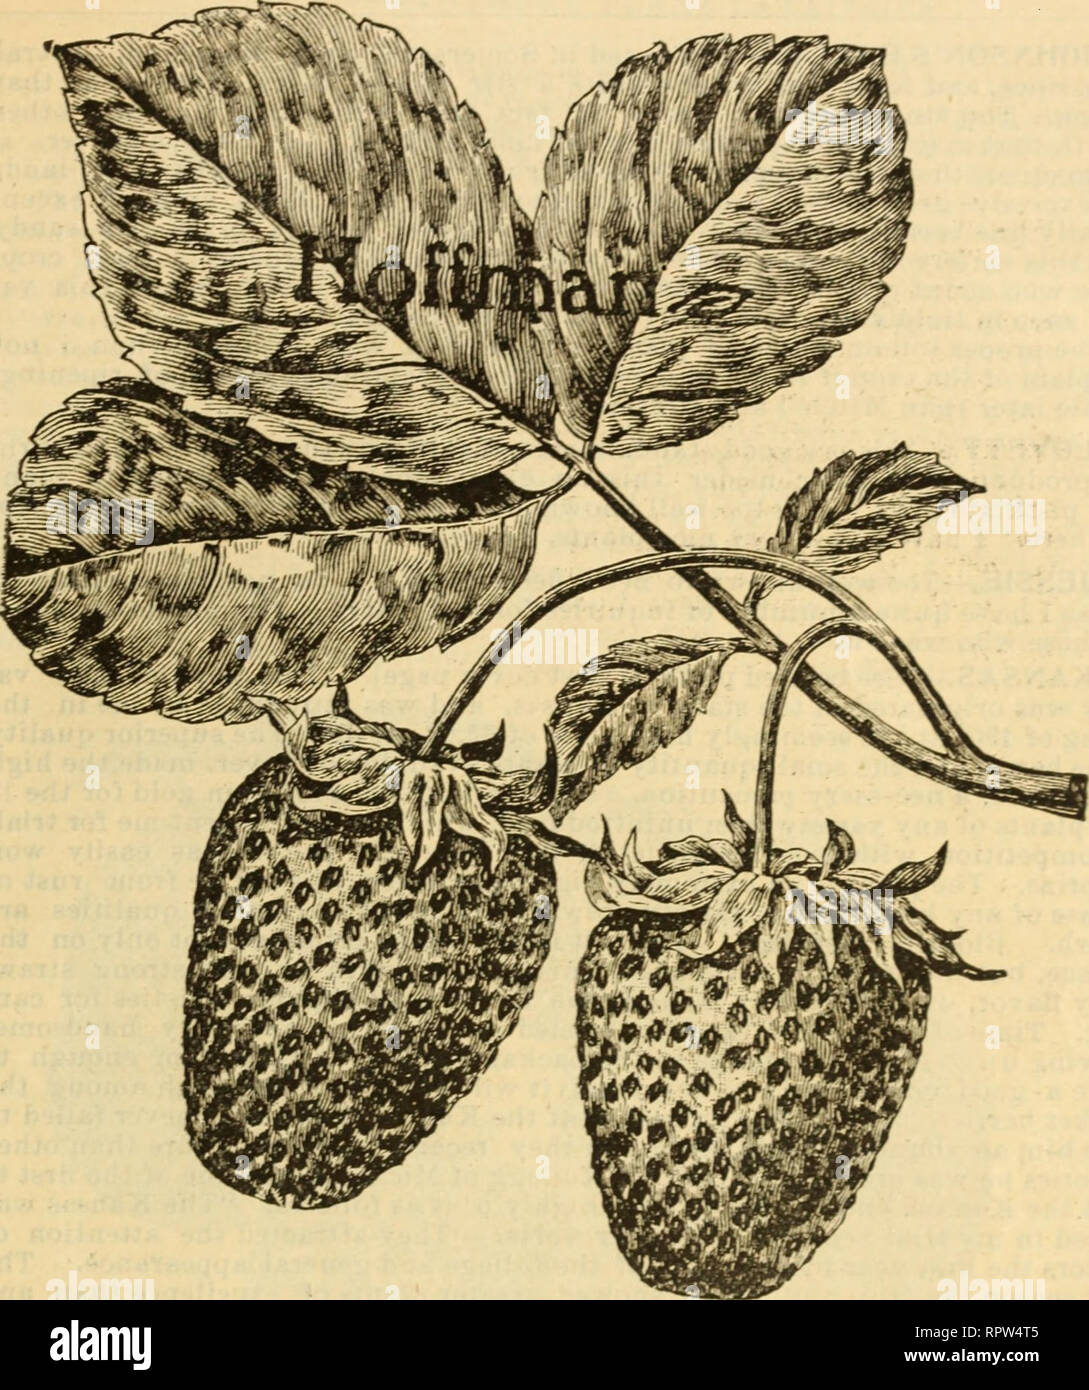 . Allen's strawberry catalogue : spring 1903. Nurseries (Horticulture) Maryland Salisbury Catalogs; Nursery stock Maryland Salisbury Catalogs; Strawberries Maryland Salisbury Catalogs. ALLEN'S STRAWBERRY PLANT CATALOGUE. 15. HOFFMAN.—Has been the favorite in the South for many years, and it carries so well, that marketraen are continually inquiring for it, and it usually brings the highest market price on this account. We have not found it pro- ductive on sandy soil, but on stiff land, not too poor, it will bear a very good crop of berries that will bring the highest market price. The accompan Stock Photo